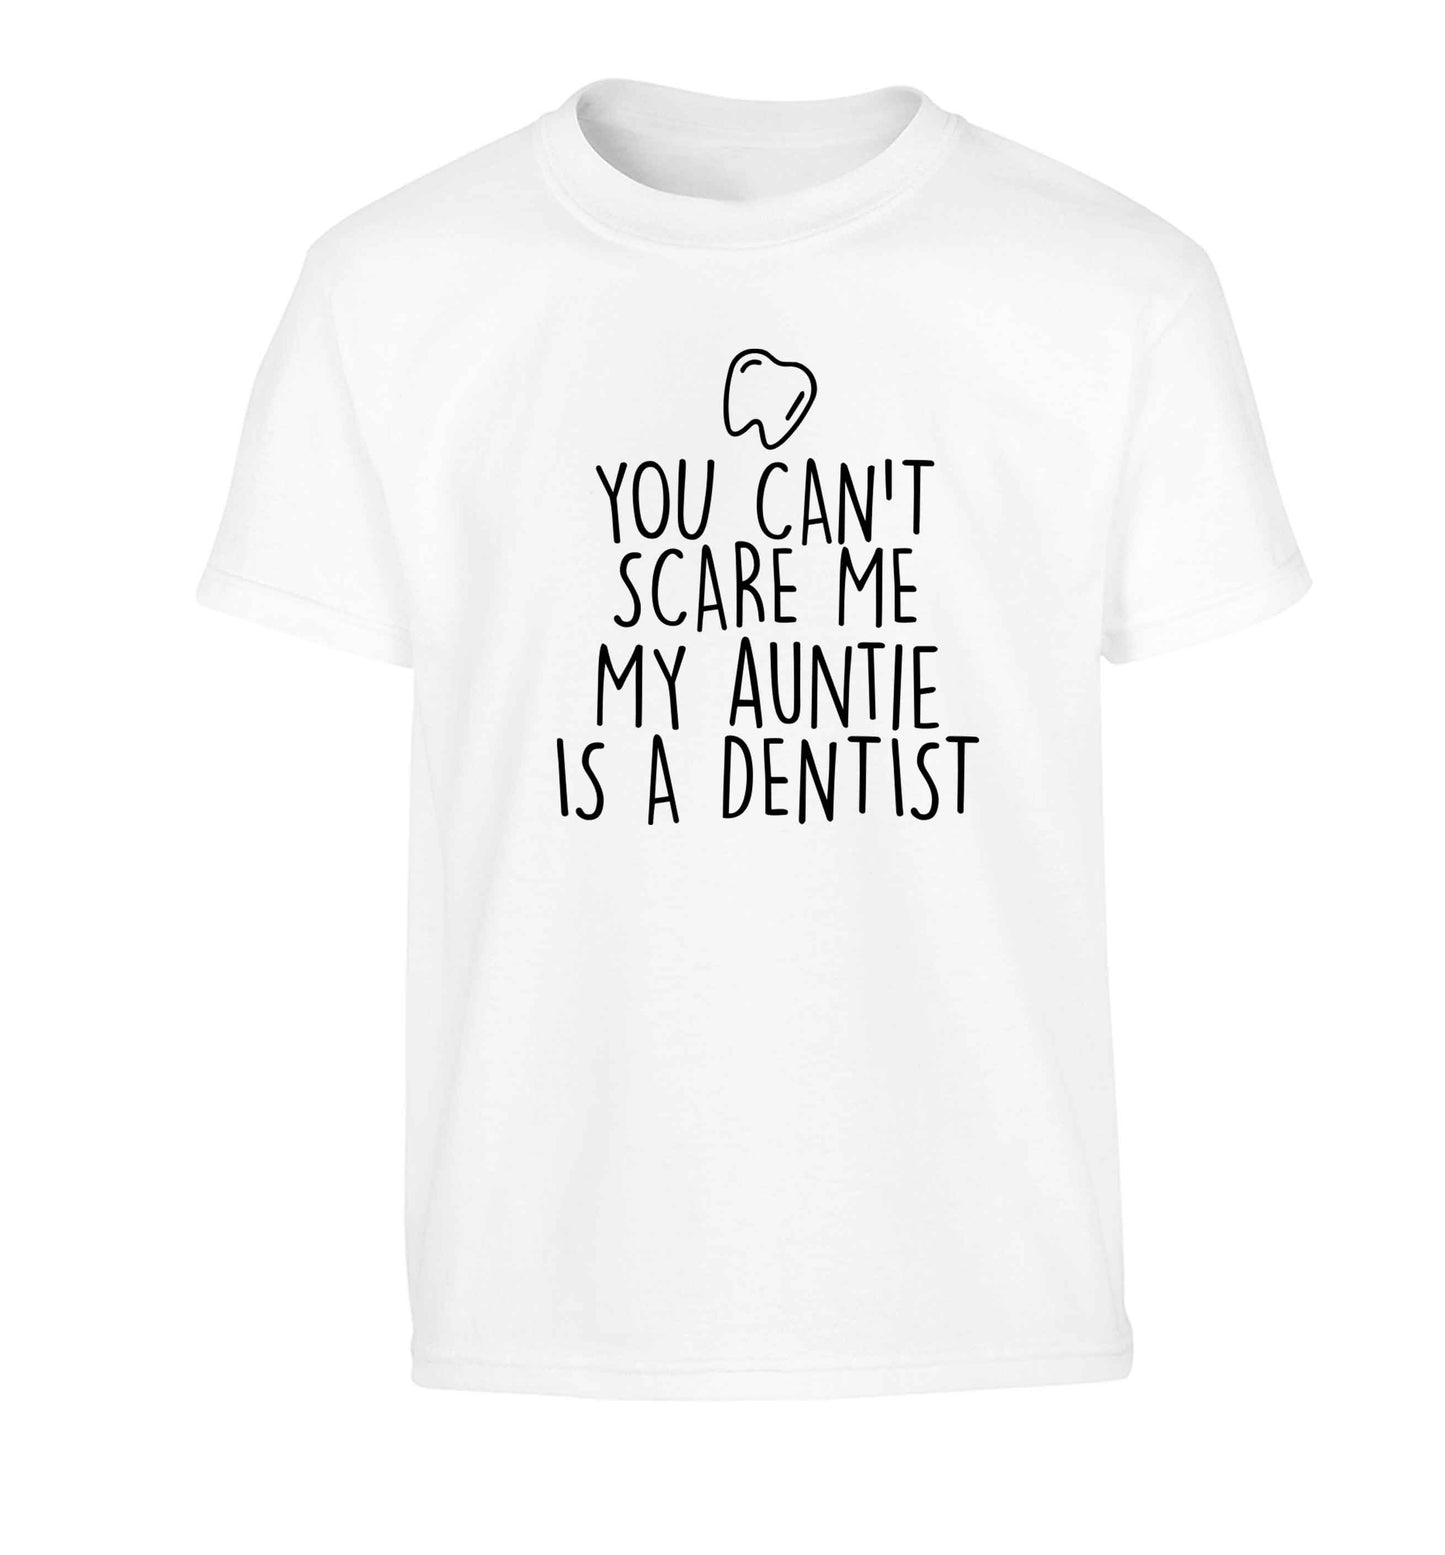 You can't scare me my auntie is a dentist Children's white Tshirt 12-13 Years